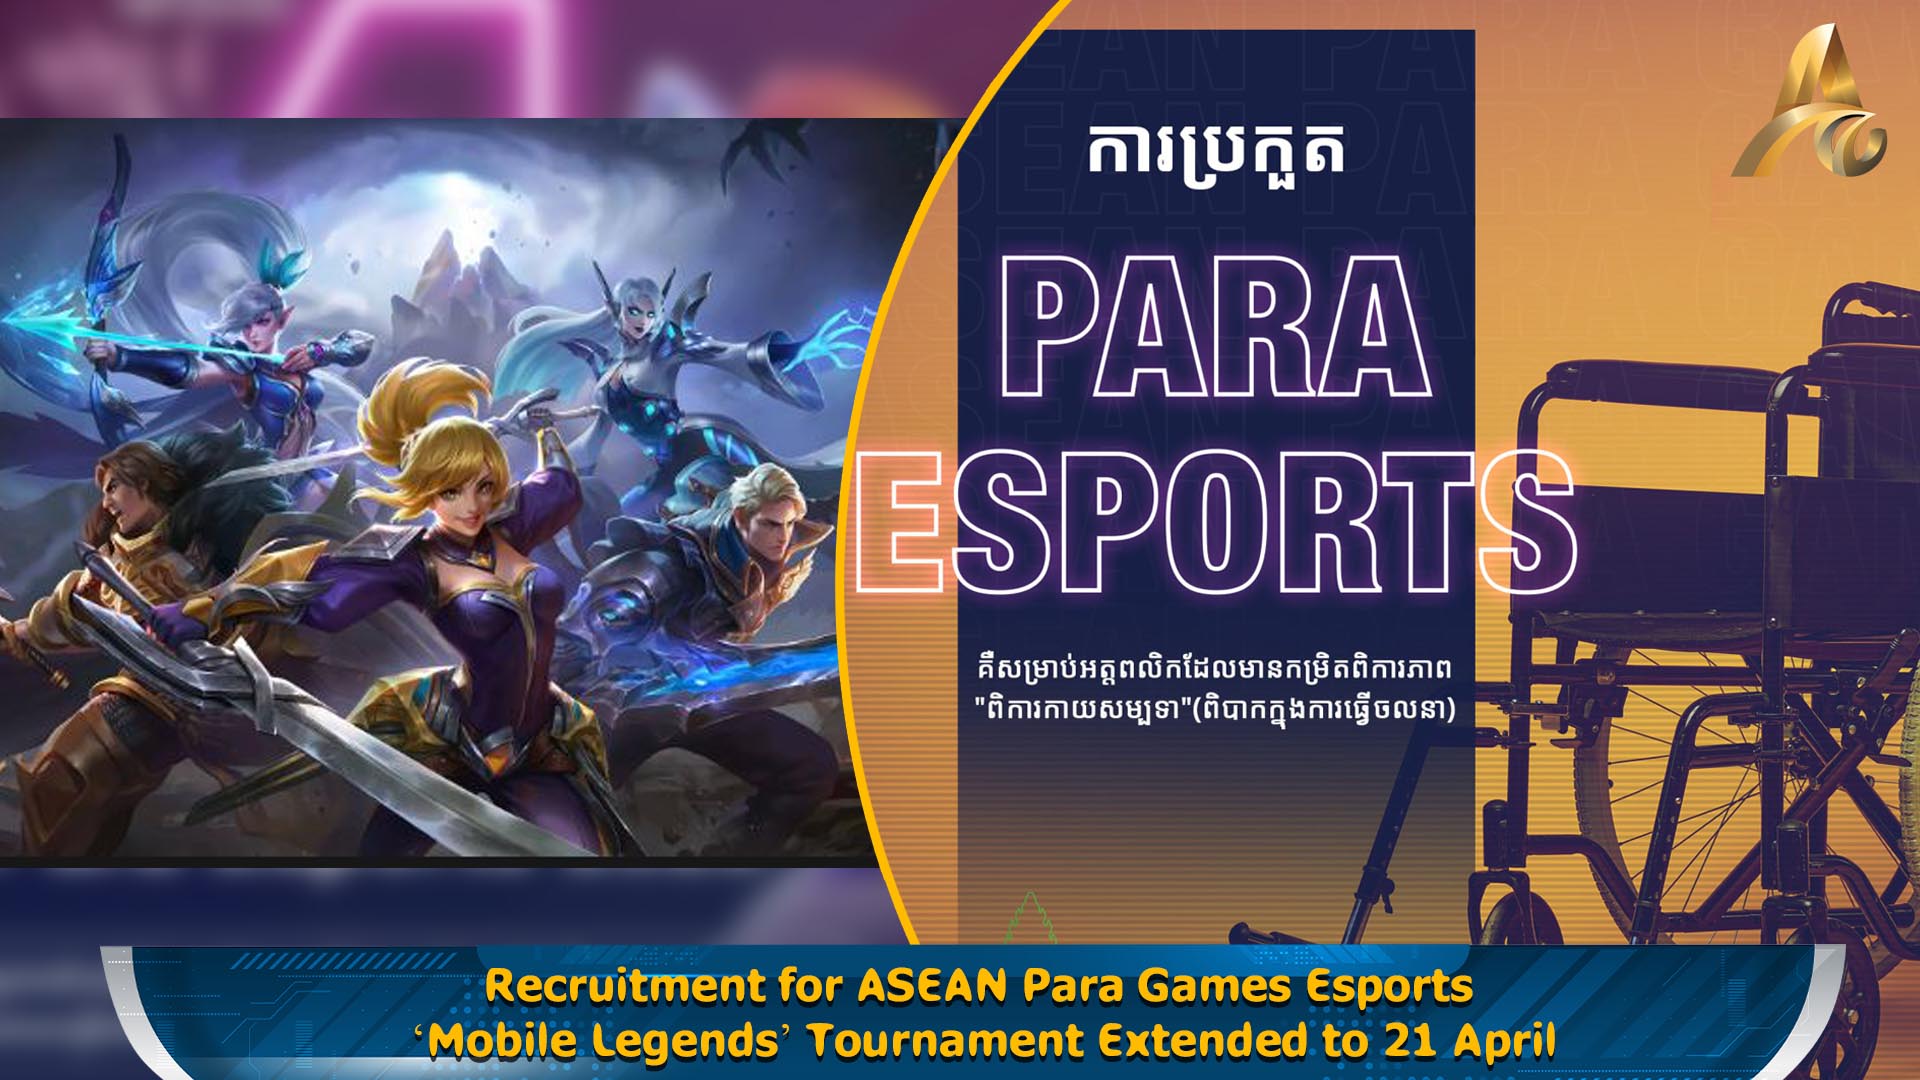 Recruitment for ASEAN Para Games Esports Mobile Legends Tournament Extended to 21 April